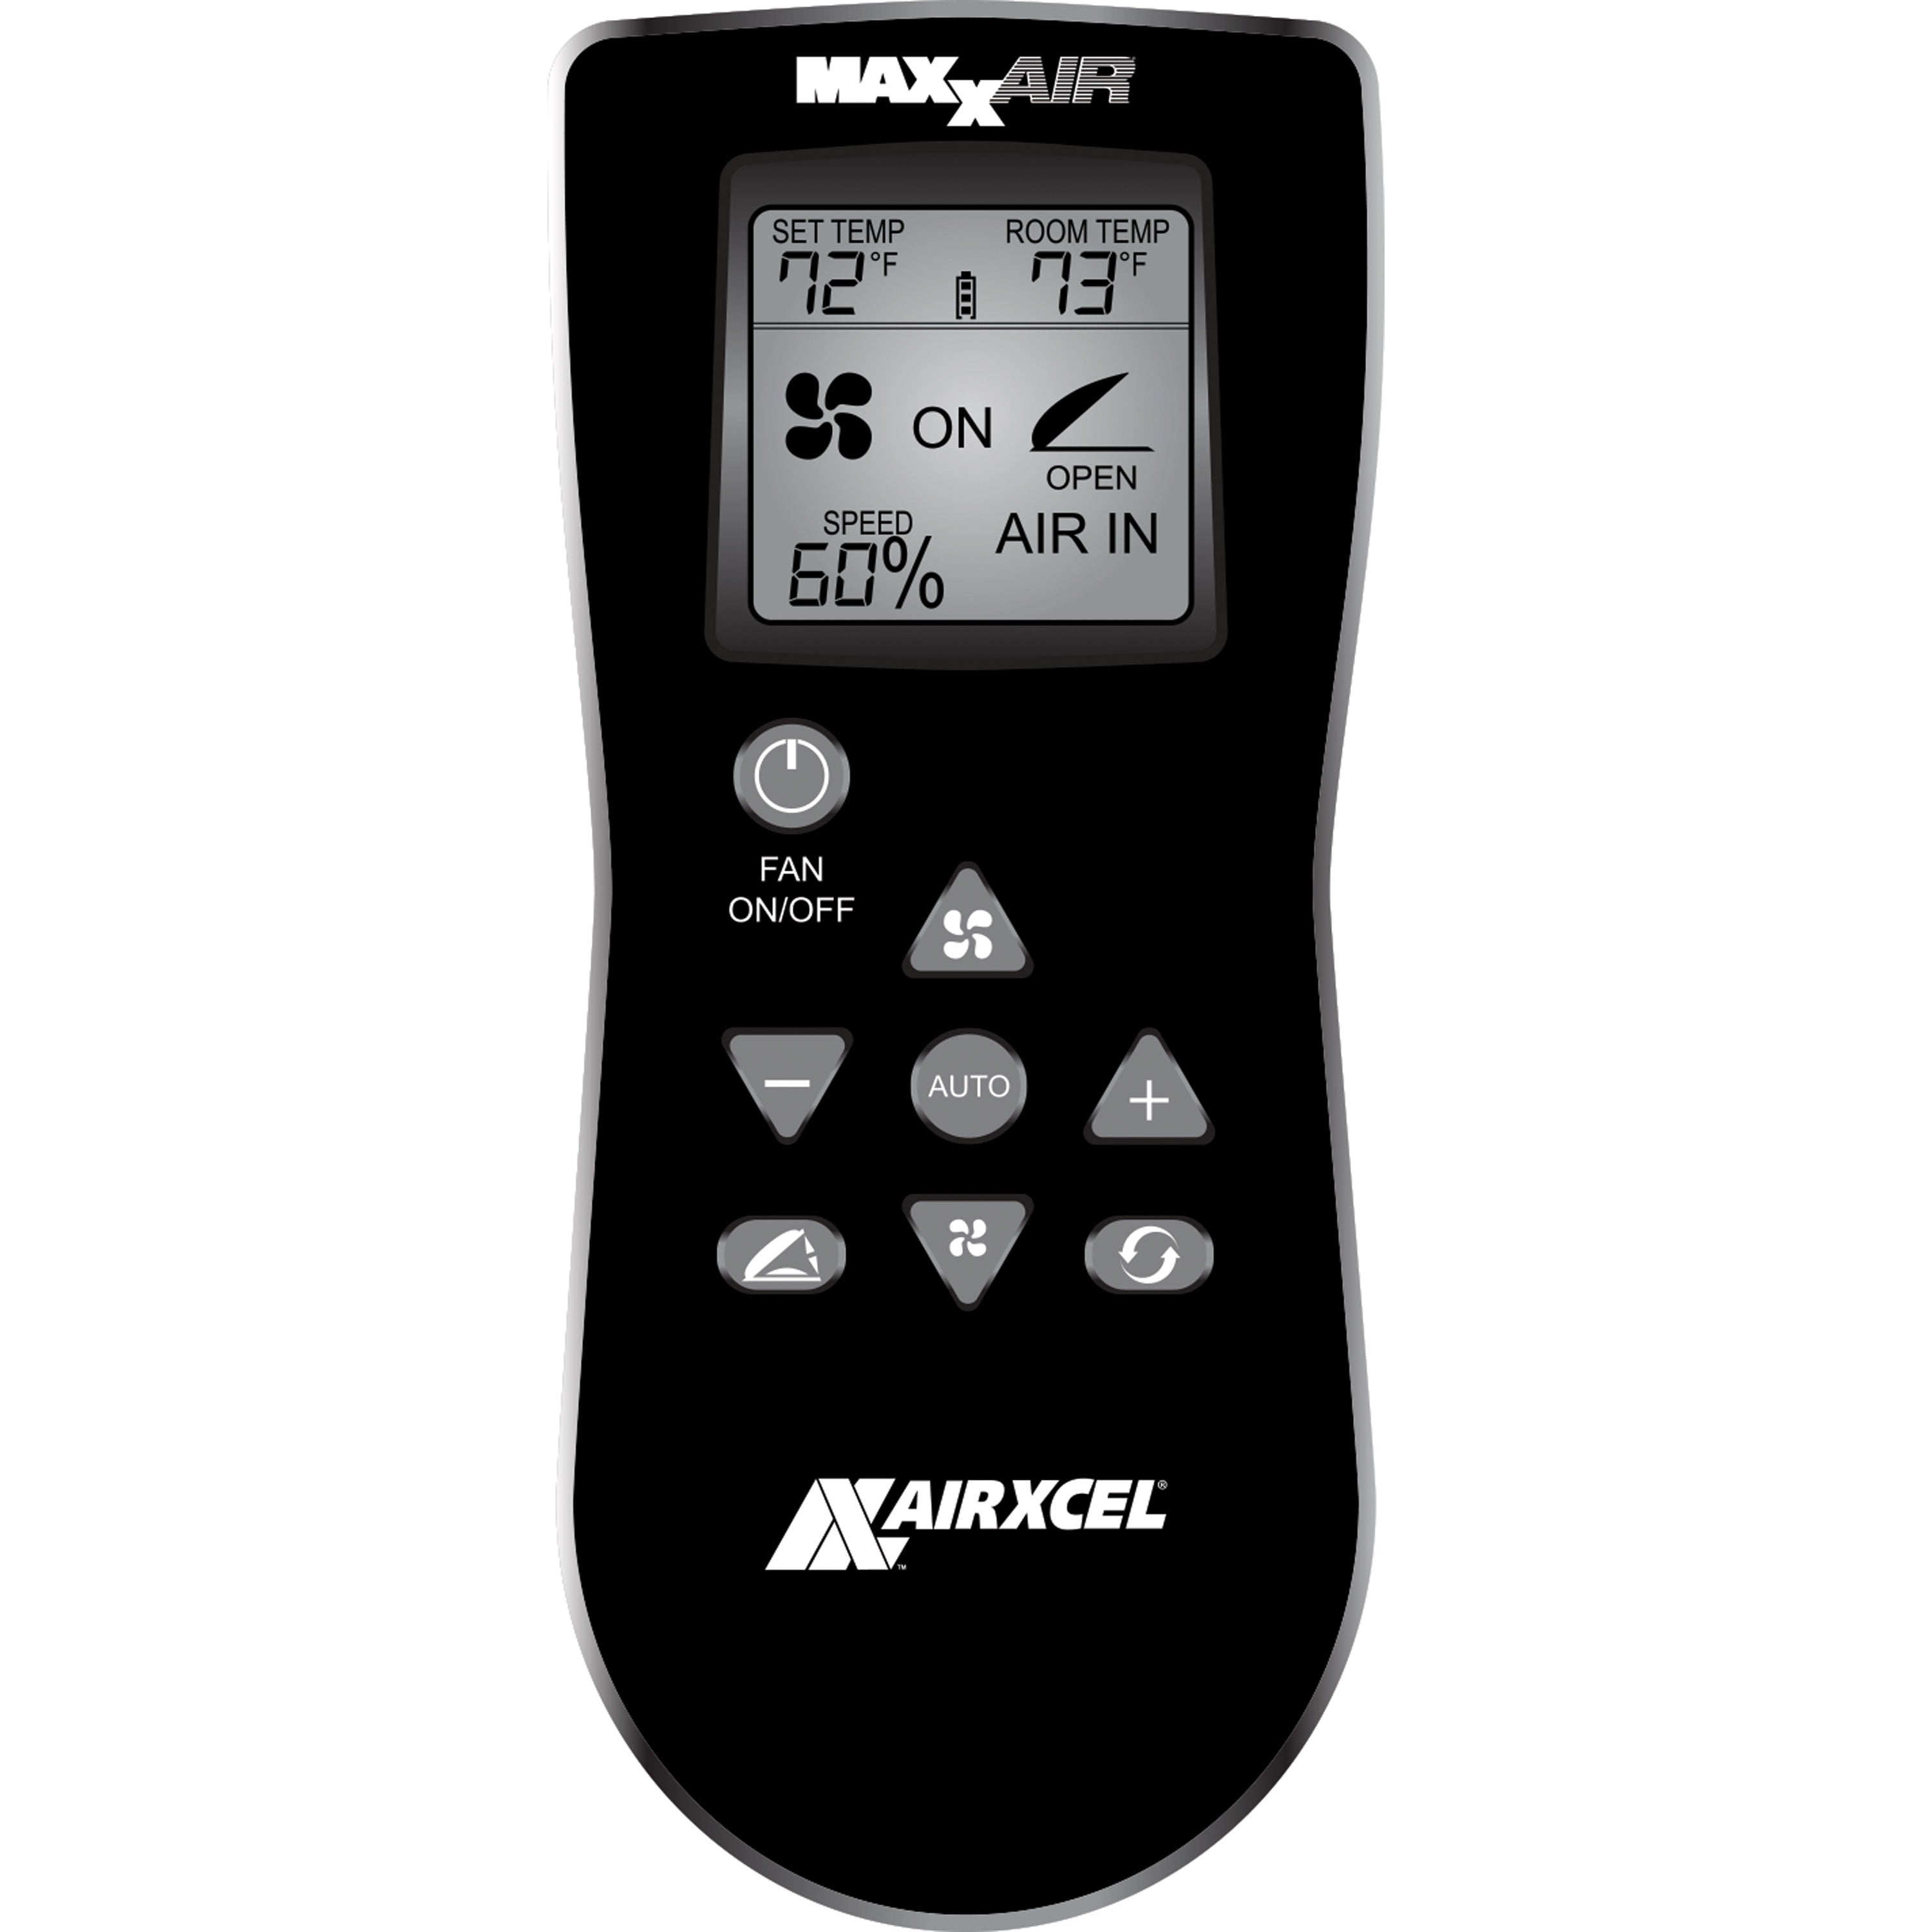 MAXXAIR 00A01150K Handheld Remote Control for MAXXFAN Plus and Deluxe - Black 00A0115K